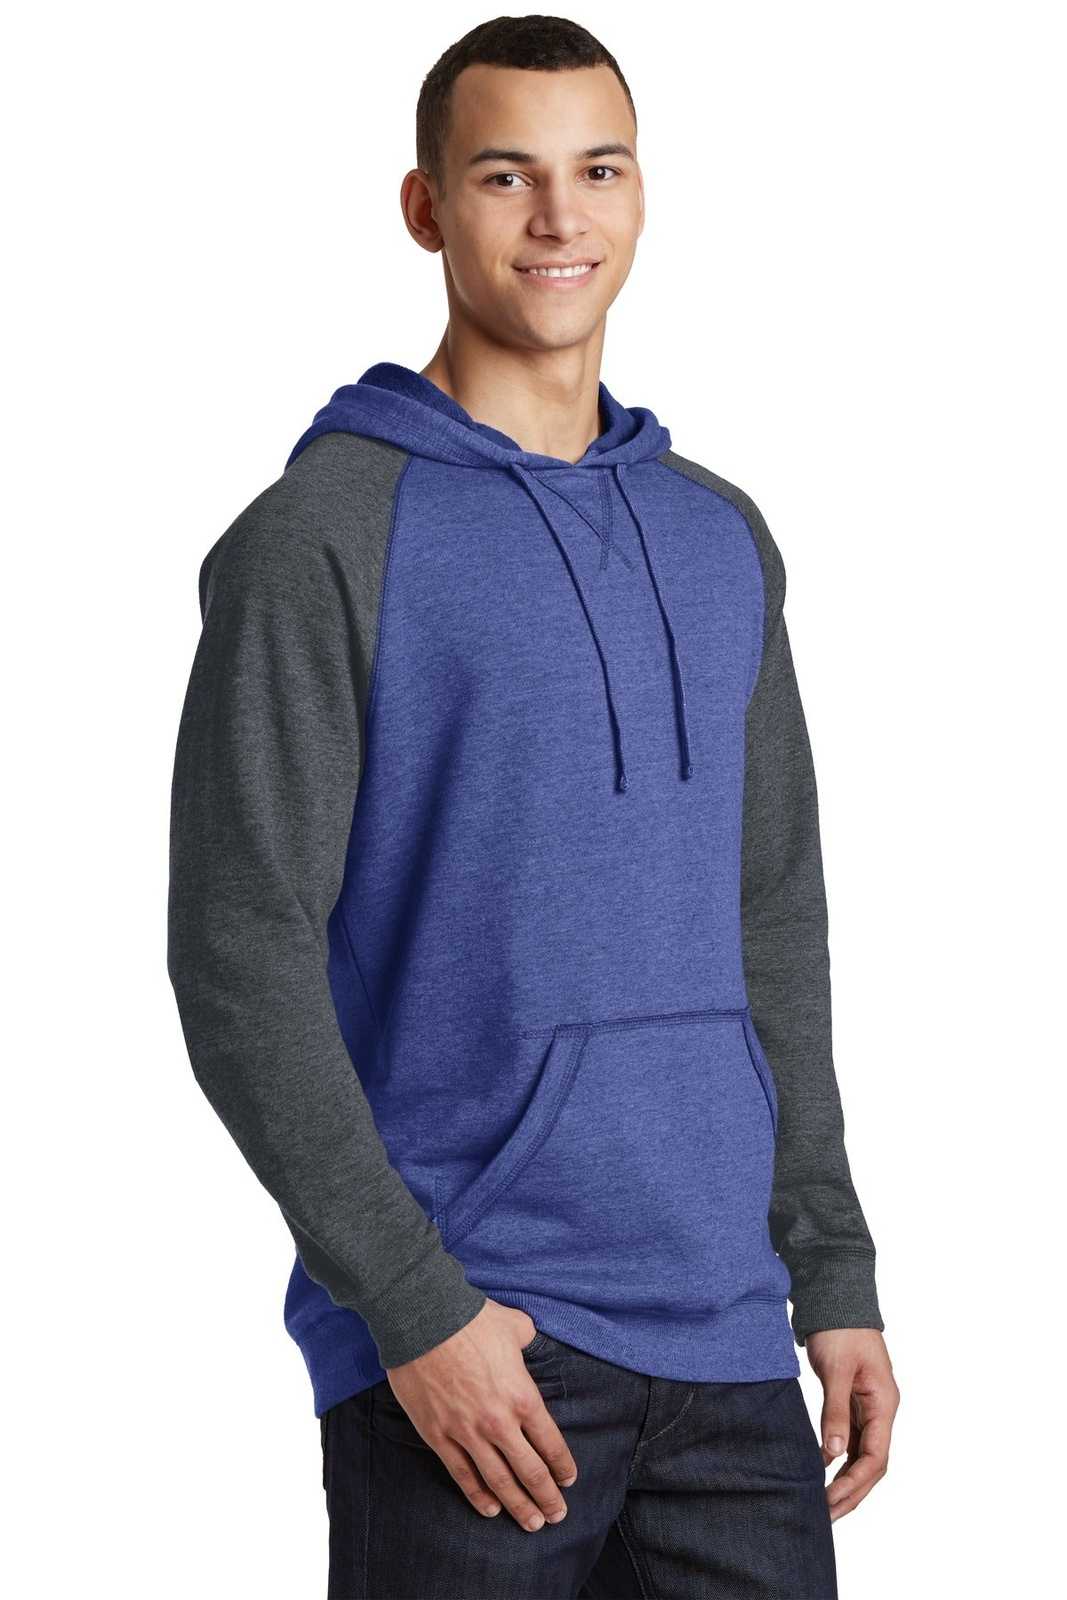 District DT196 Young Mens Lightweight Fleece Raglan Hoodie - Heathered Deep Royal Heathered Charcoal - HIT a Double - 4